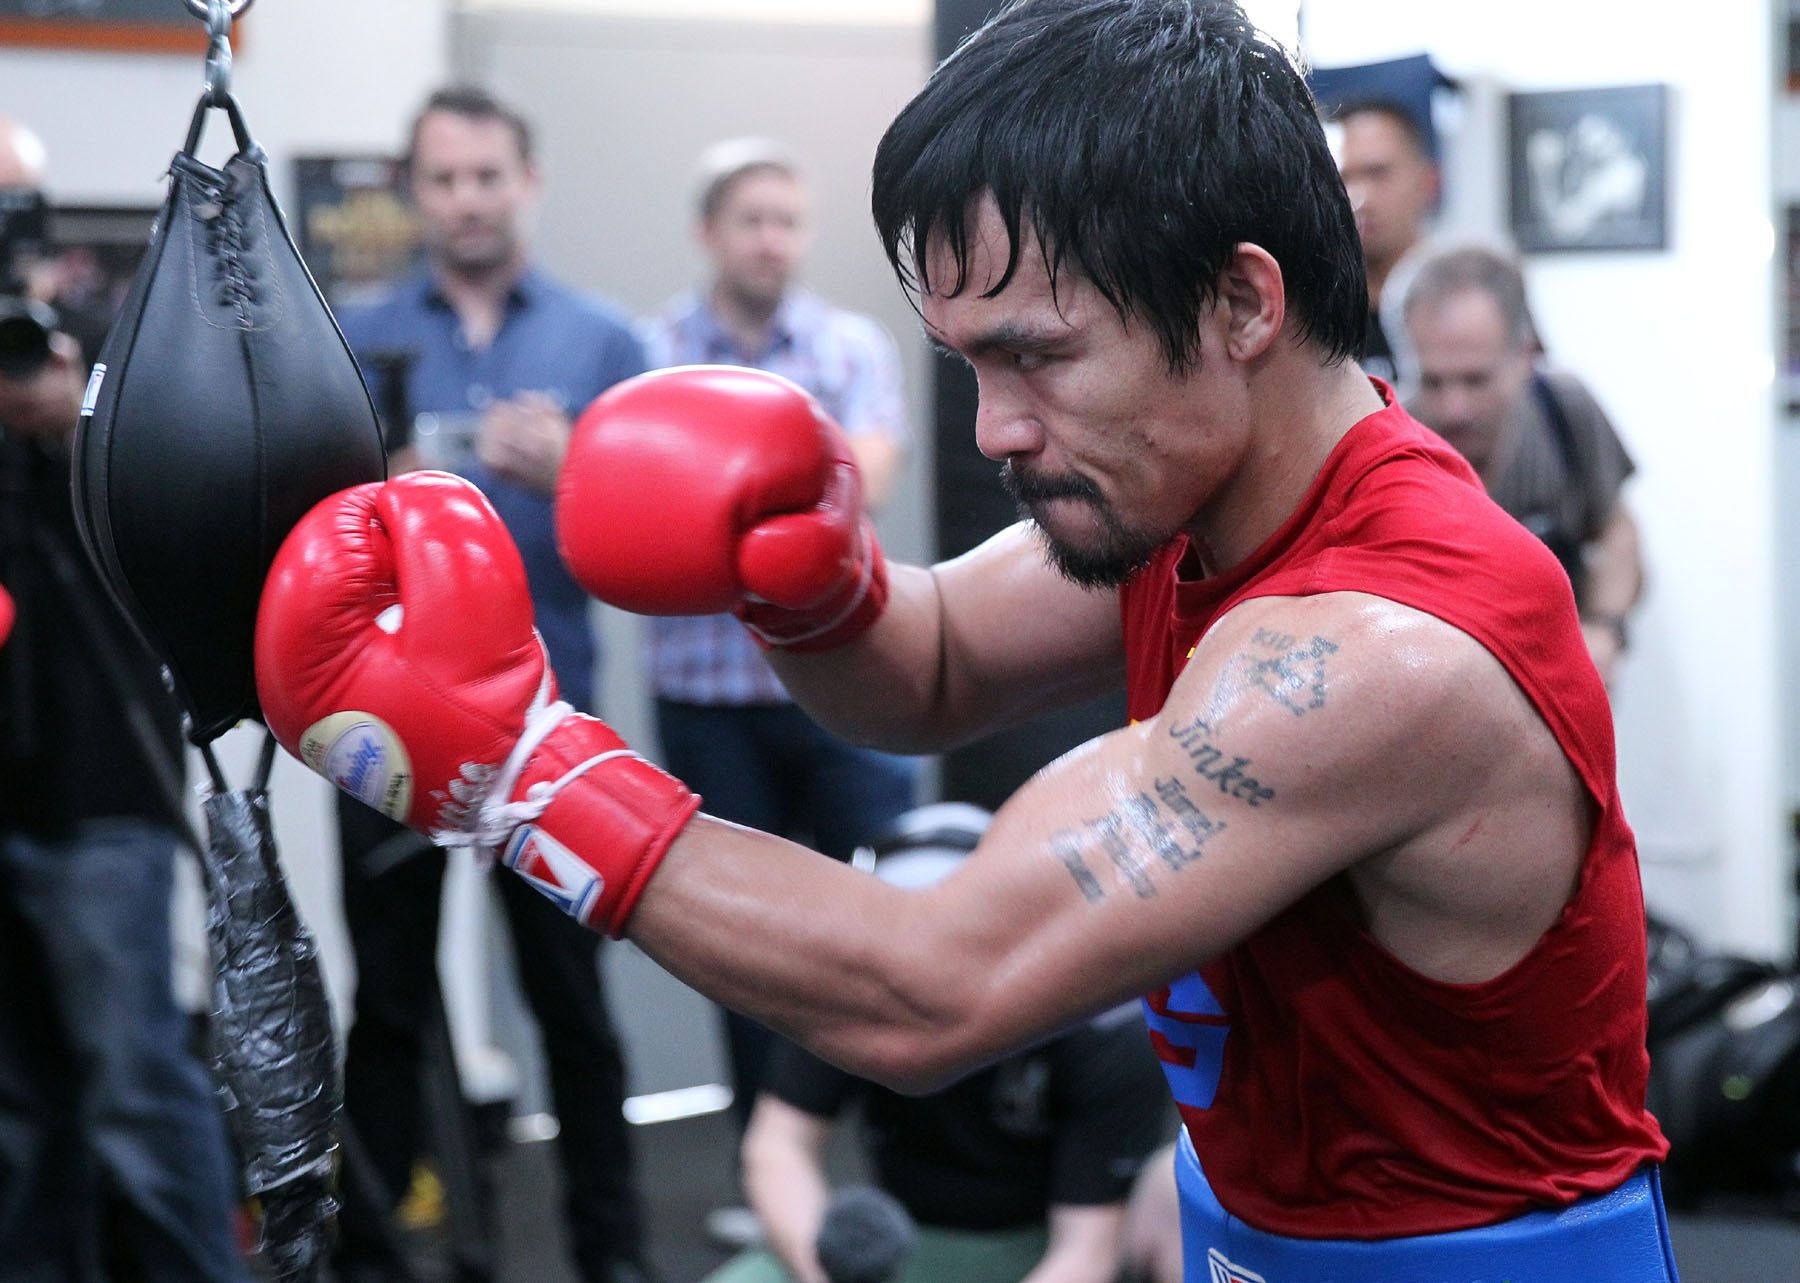 Media looks on as Manny Pacquiao works on the timing ball. Photo by Chris Farina/Top Rank 